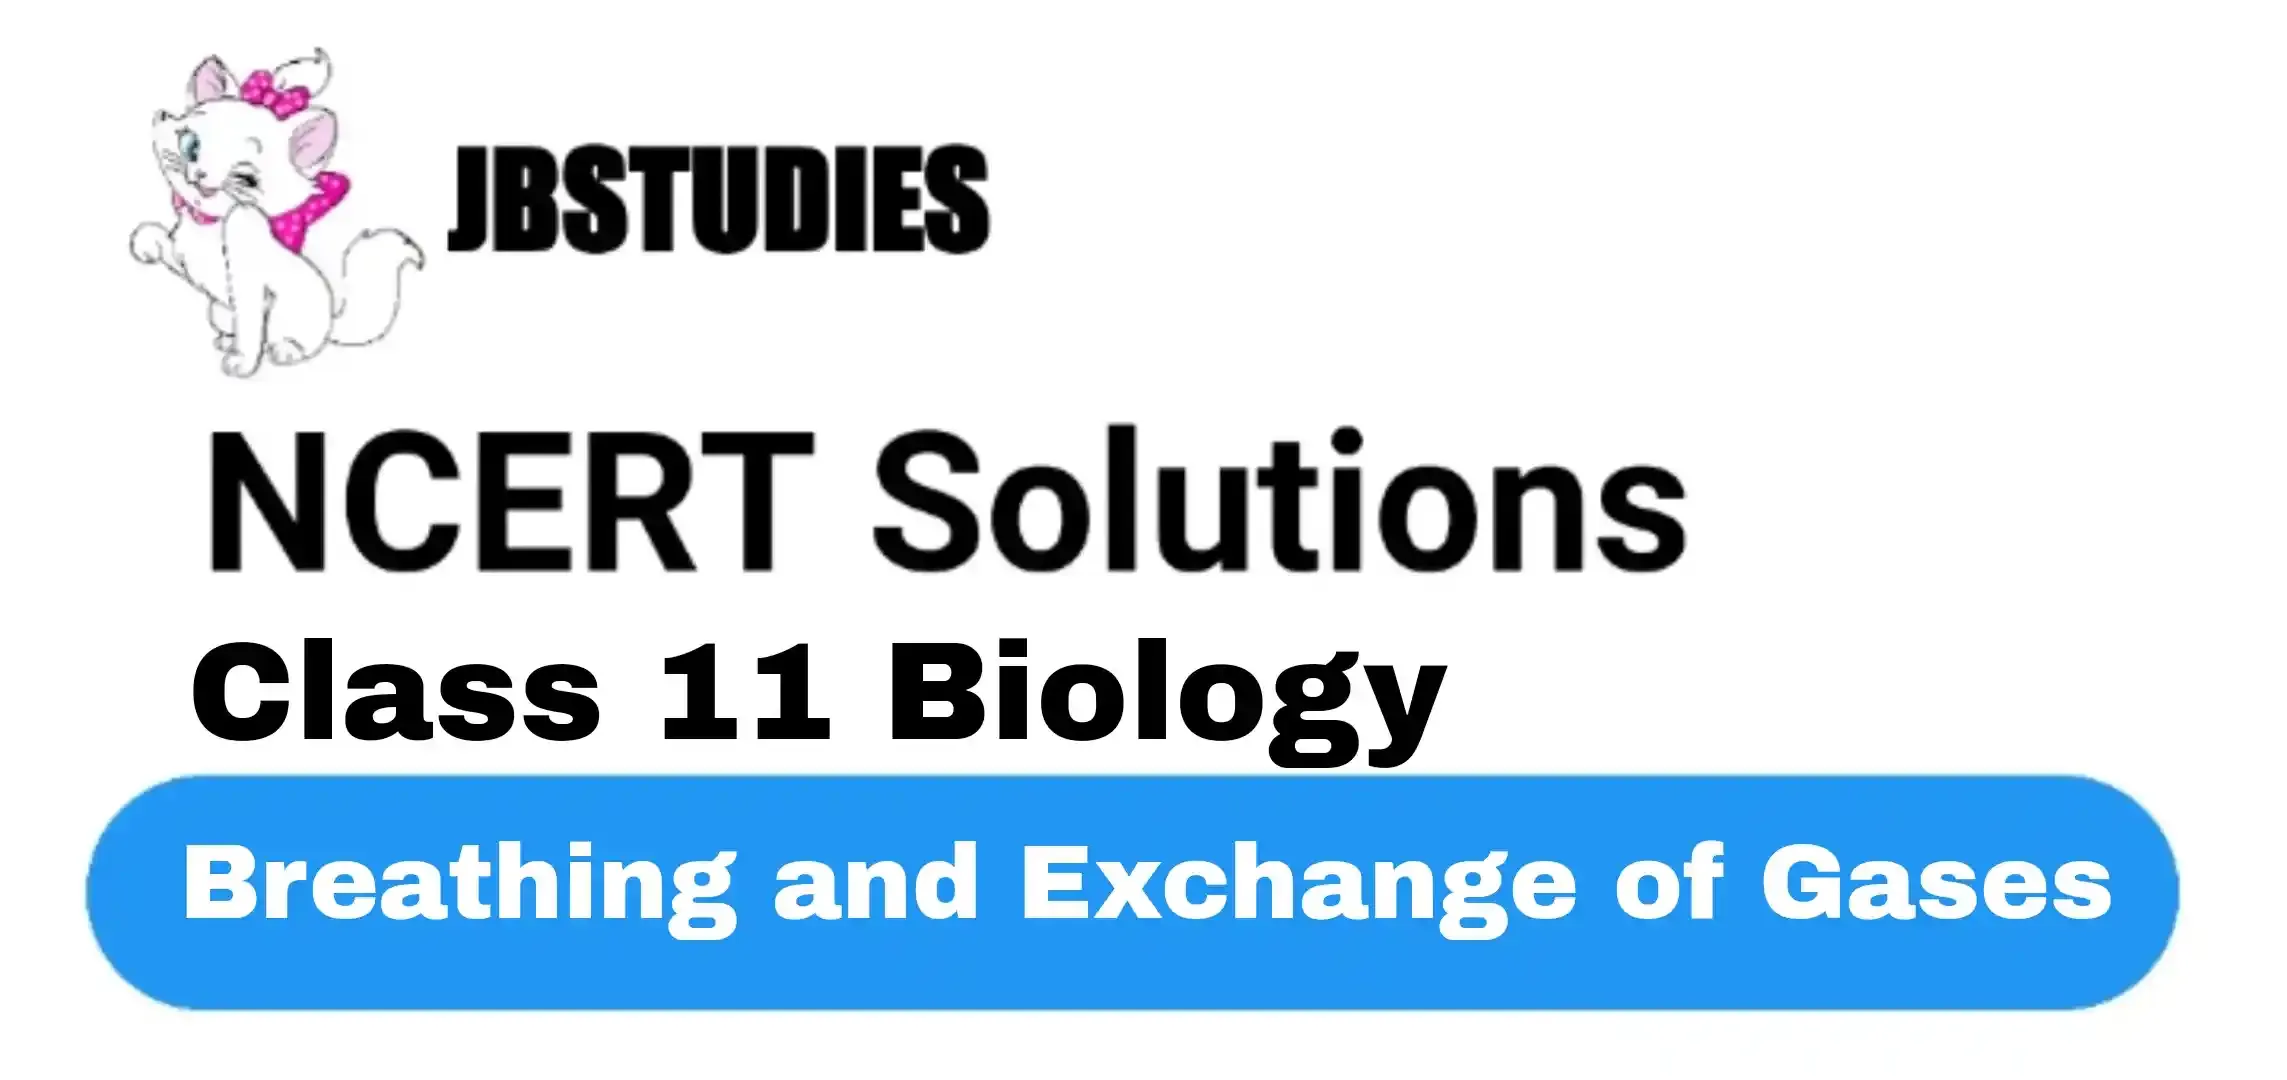 Solutions Class 11 Biology Chapter -17 (Breathing and Exchange of Gases)